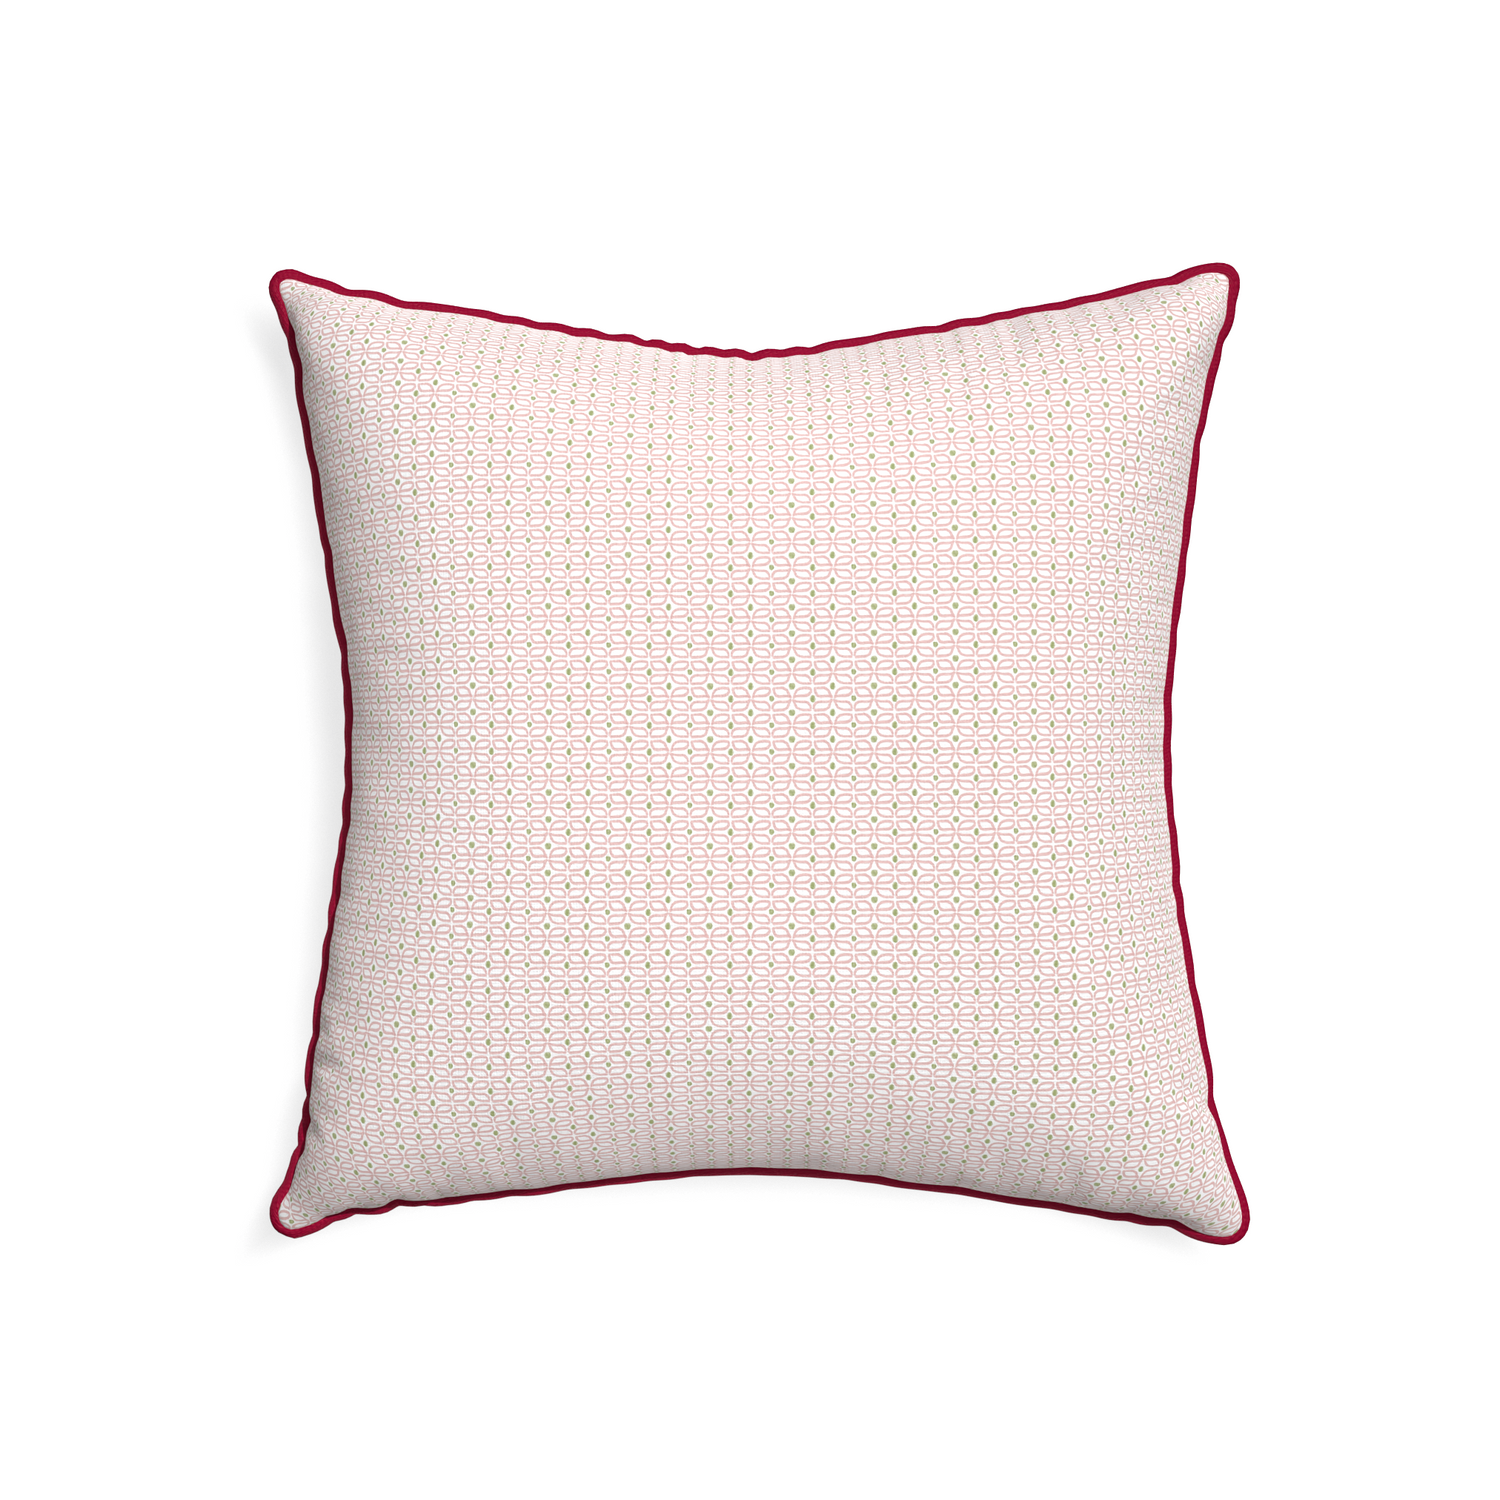 22-square loomi pink custom pink geometricpillow with raspberry piping on white background